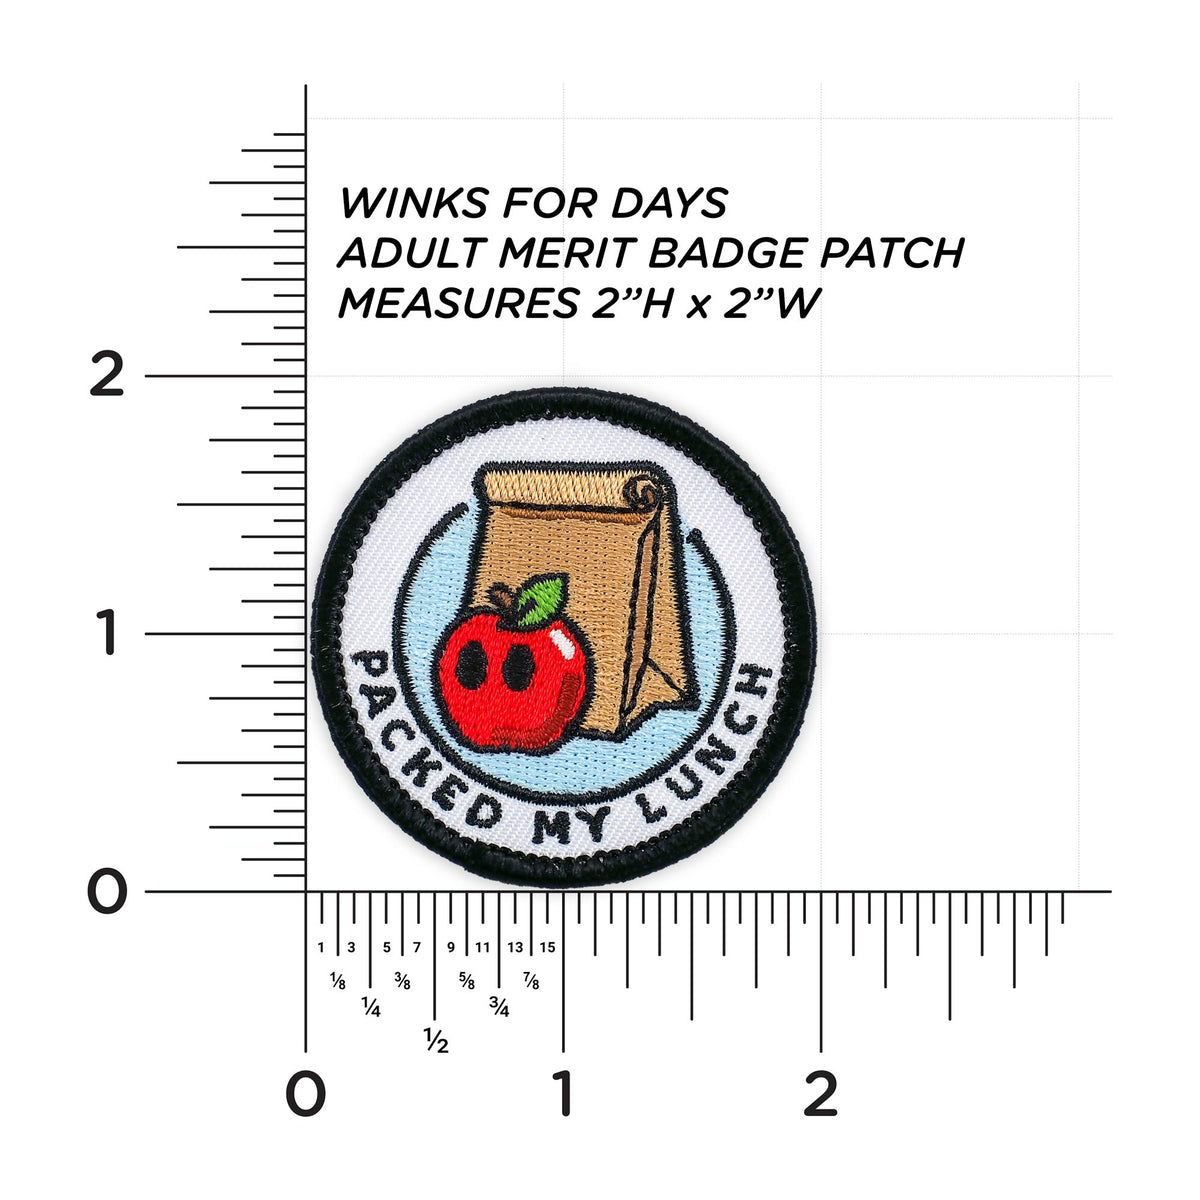 Packed My Lunch patch measurements